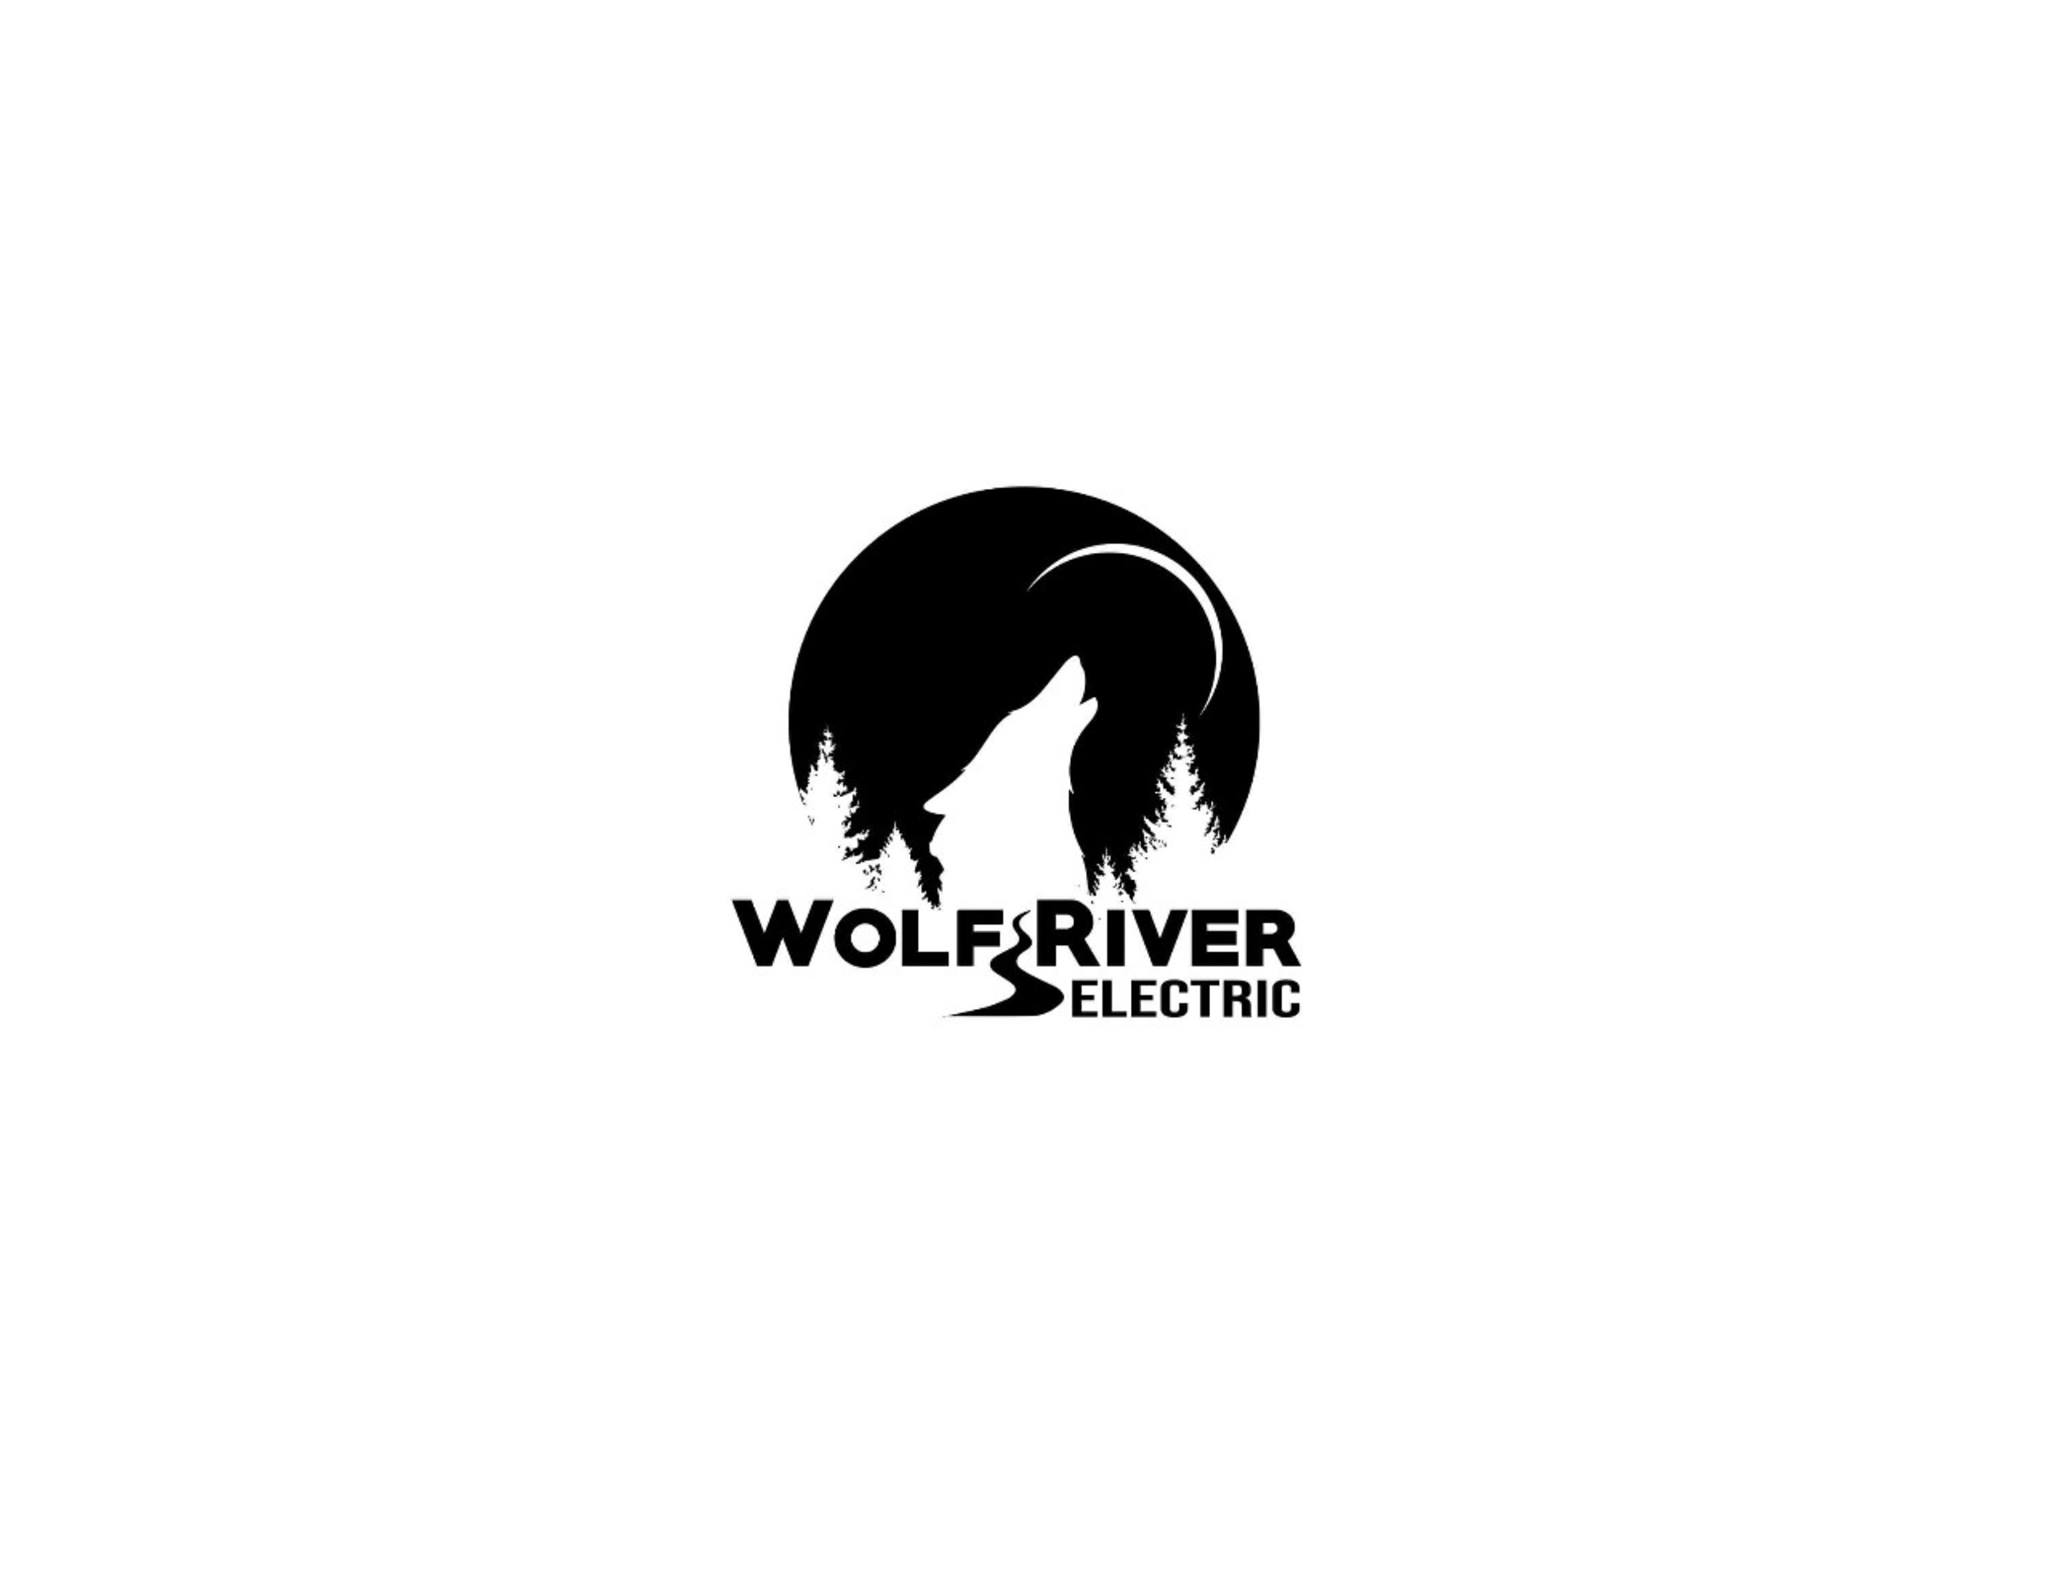 Wolf River